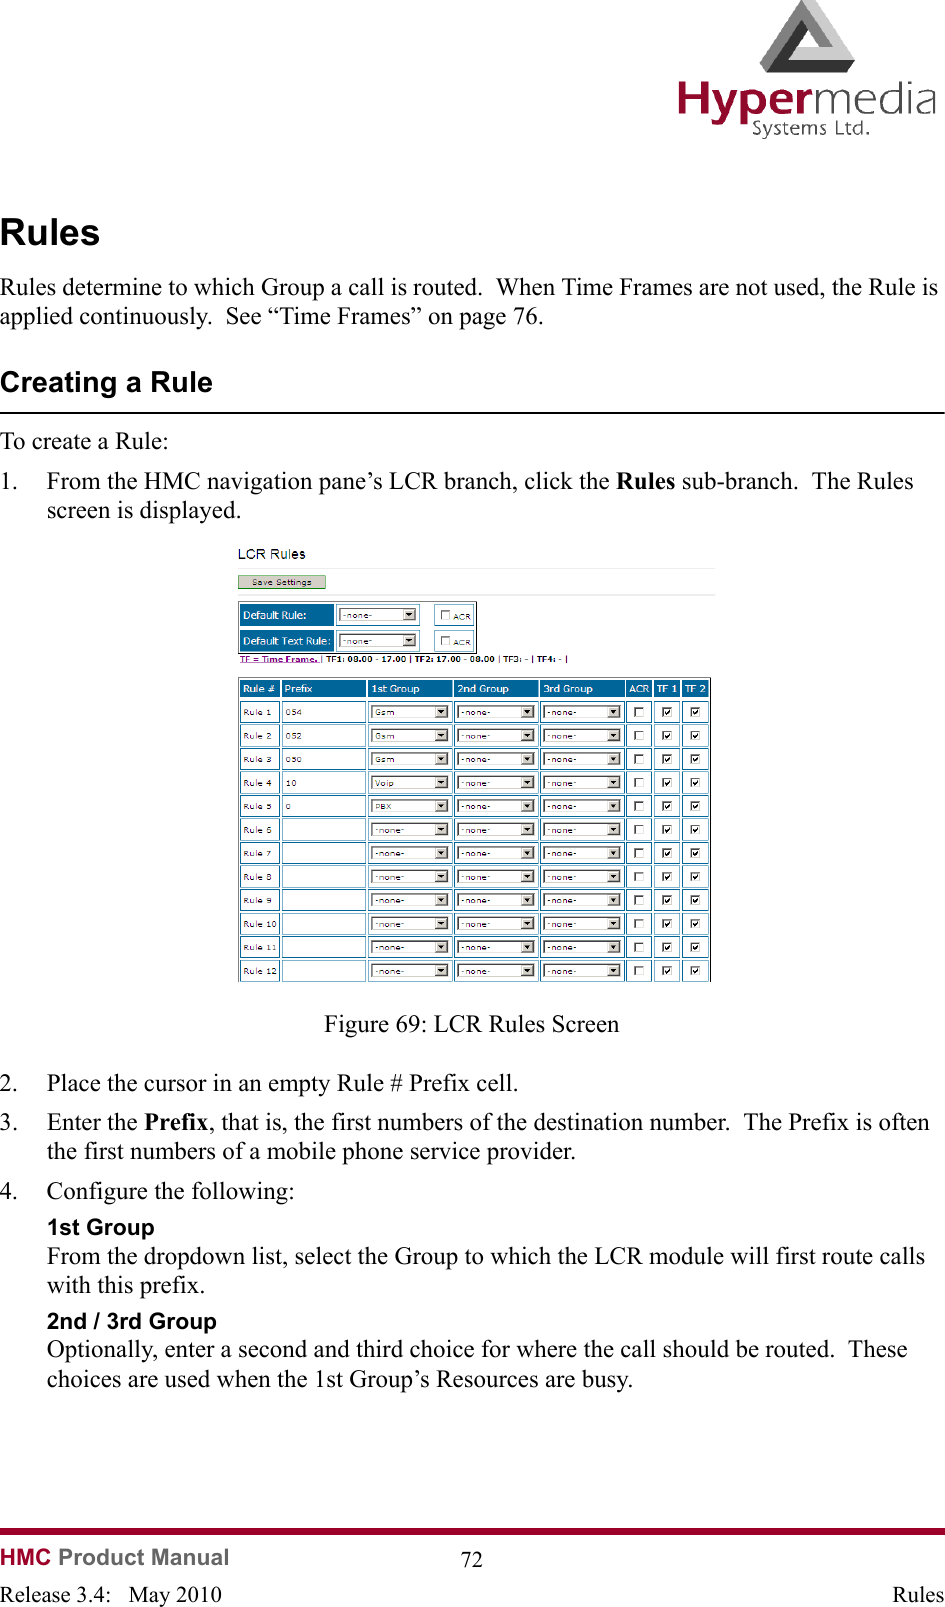   HMC Product Manual  72Release 3.4:   May 2010 RulesRulesRules determine to which Group a call is routed.  When Time Frames are not used, the Rule is applied continuously.  See “Time Frames” on page 76.Creating a RuleTo create a Rule:1. From the HMC navigation pane’s LCR branch, click the Rules sub-branch.  The Rules screen is displayed.              Figure 69: LCR Rules Screen2. Place the cursor in an empty Rule # Prefix cell.3. Enter the Prefix, that is, the first numbers of the destination number.  The Prefix is often the first numbers of a mobile phone service provider.4. Configure the following:1st Group From the dropdown list, select the Group to which the LCR module will first route calls with this prefix.2nd / 3rd GroupOptionally, enter a second and third choice for where the call should be routed.  These choices are used when the 1st Group’s Resources are busy.